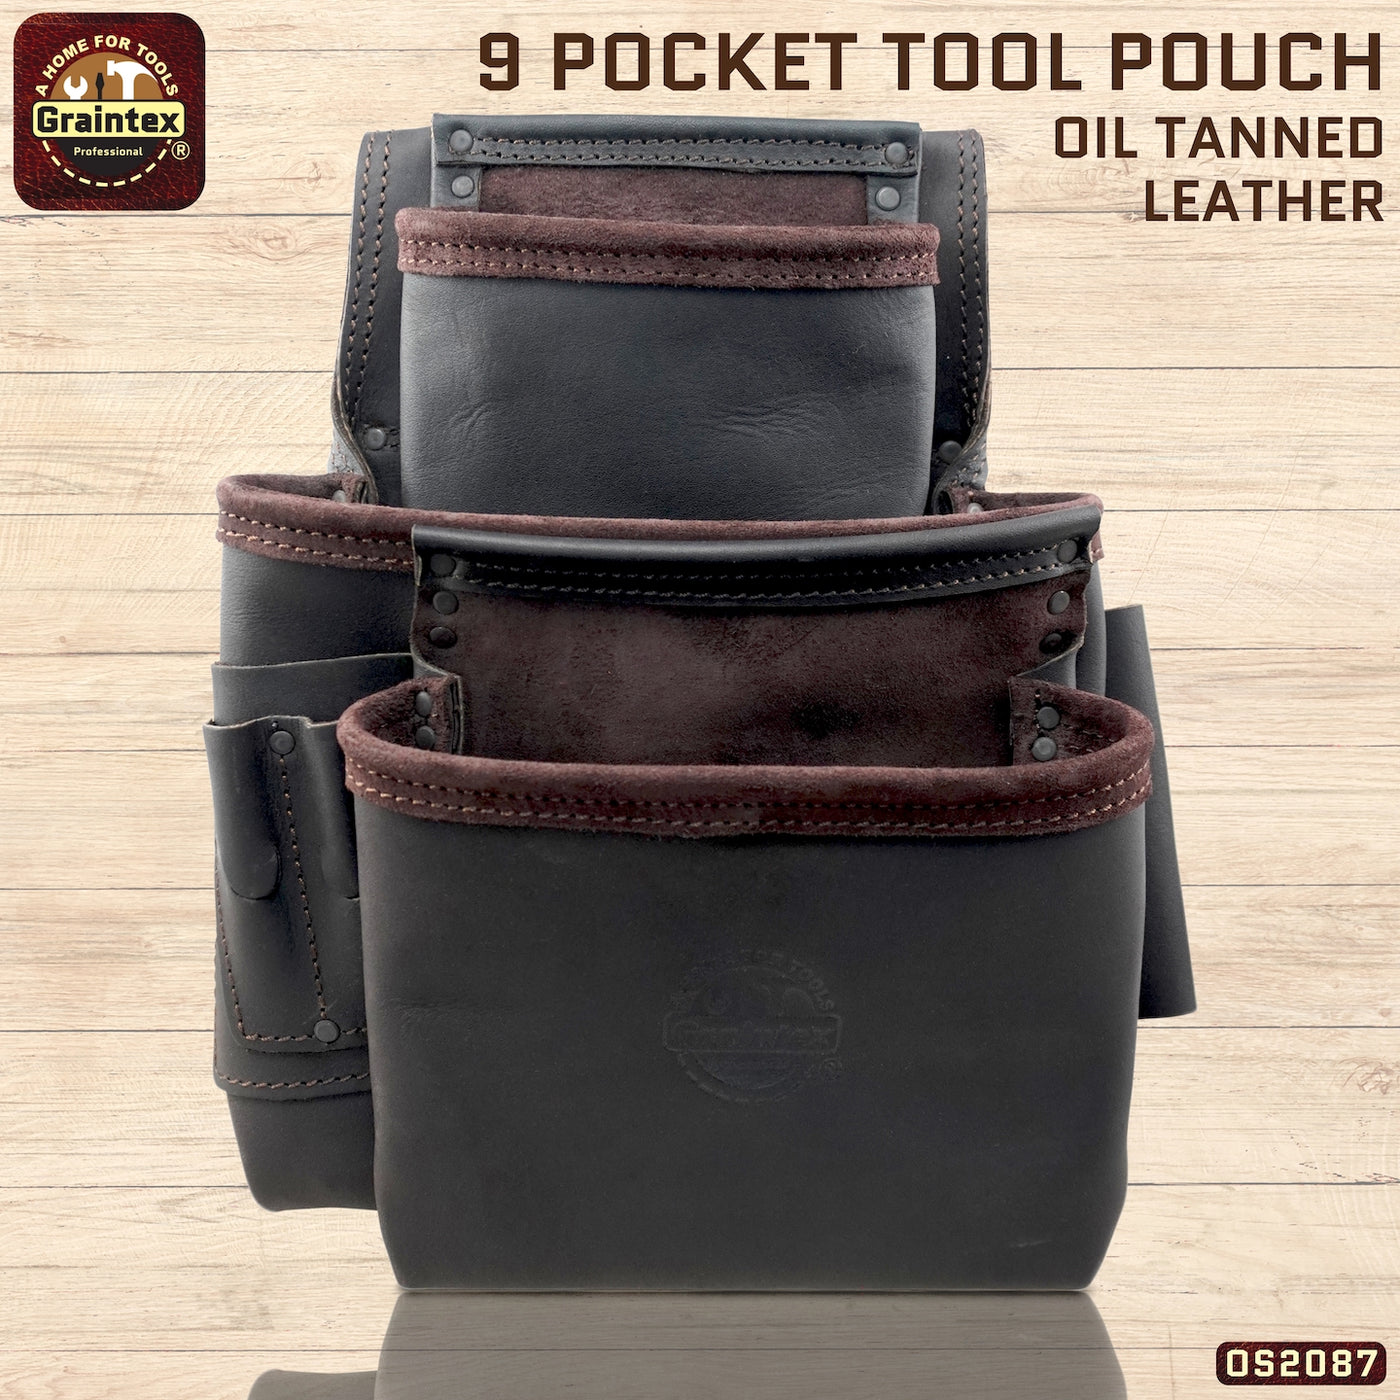 OS2087 :: 9 Pocket Framer’s Nail & Tool Pouch Brown Color Top Grain Oil Tanned Leather